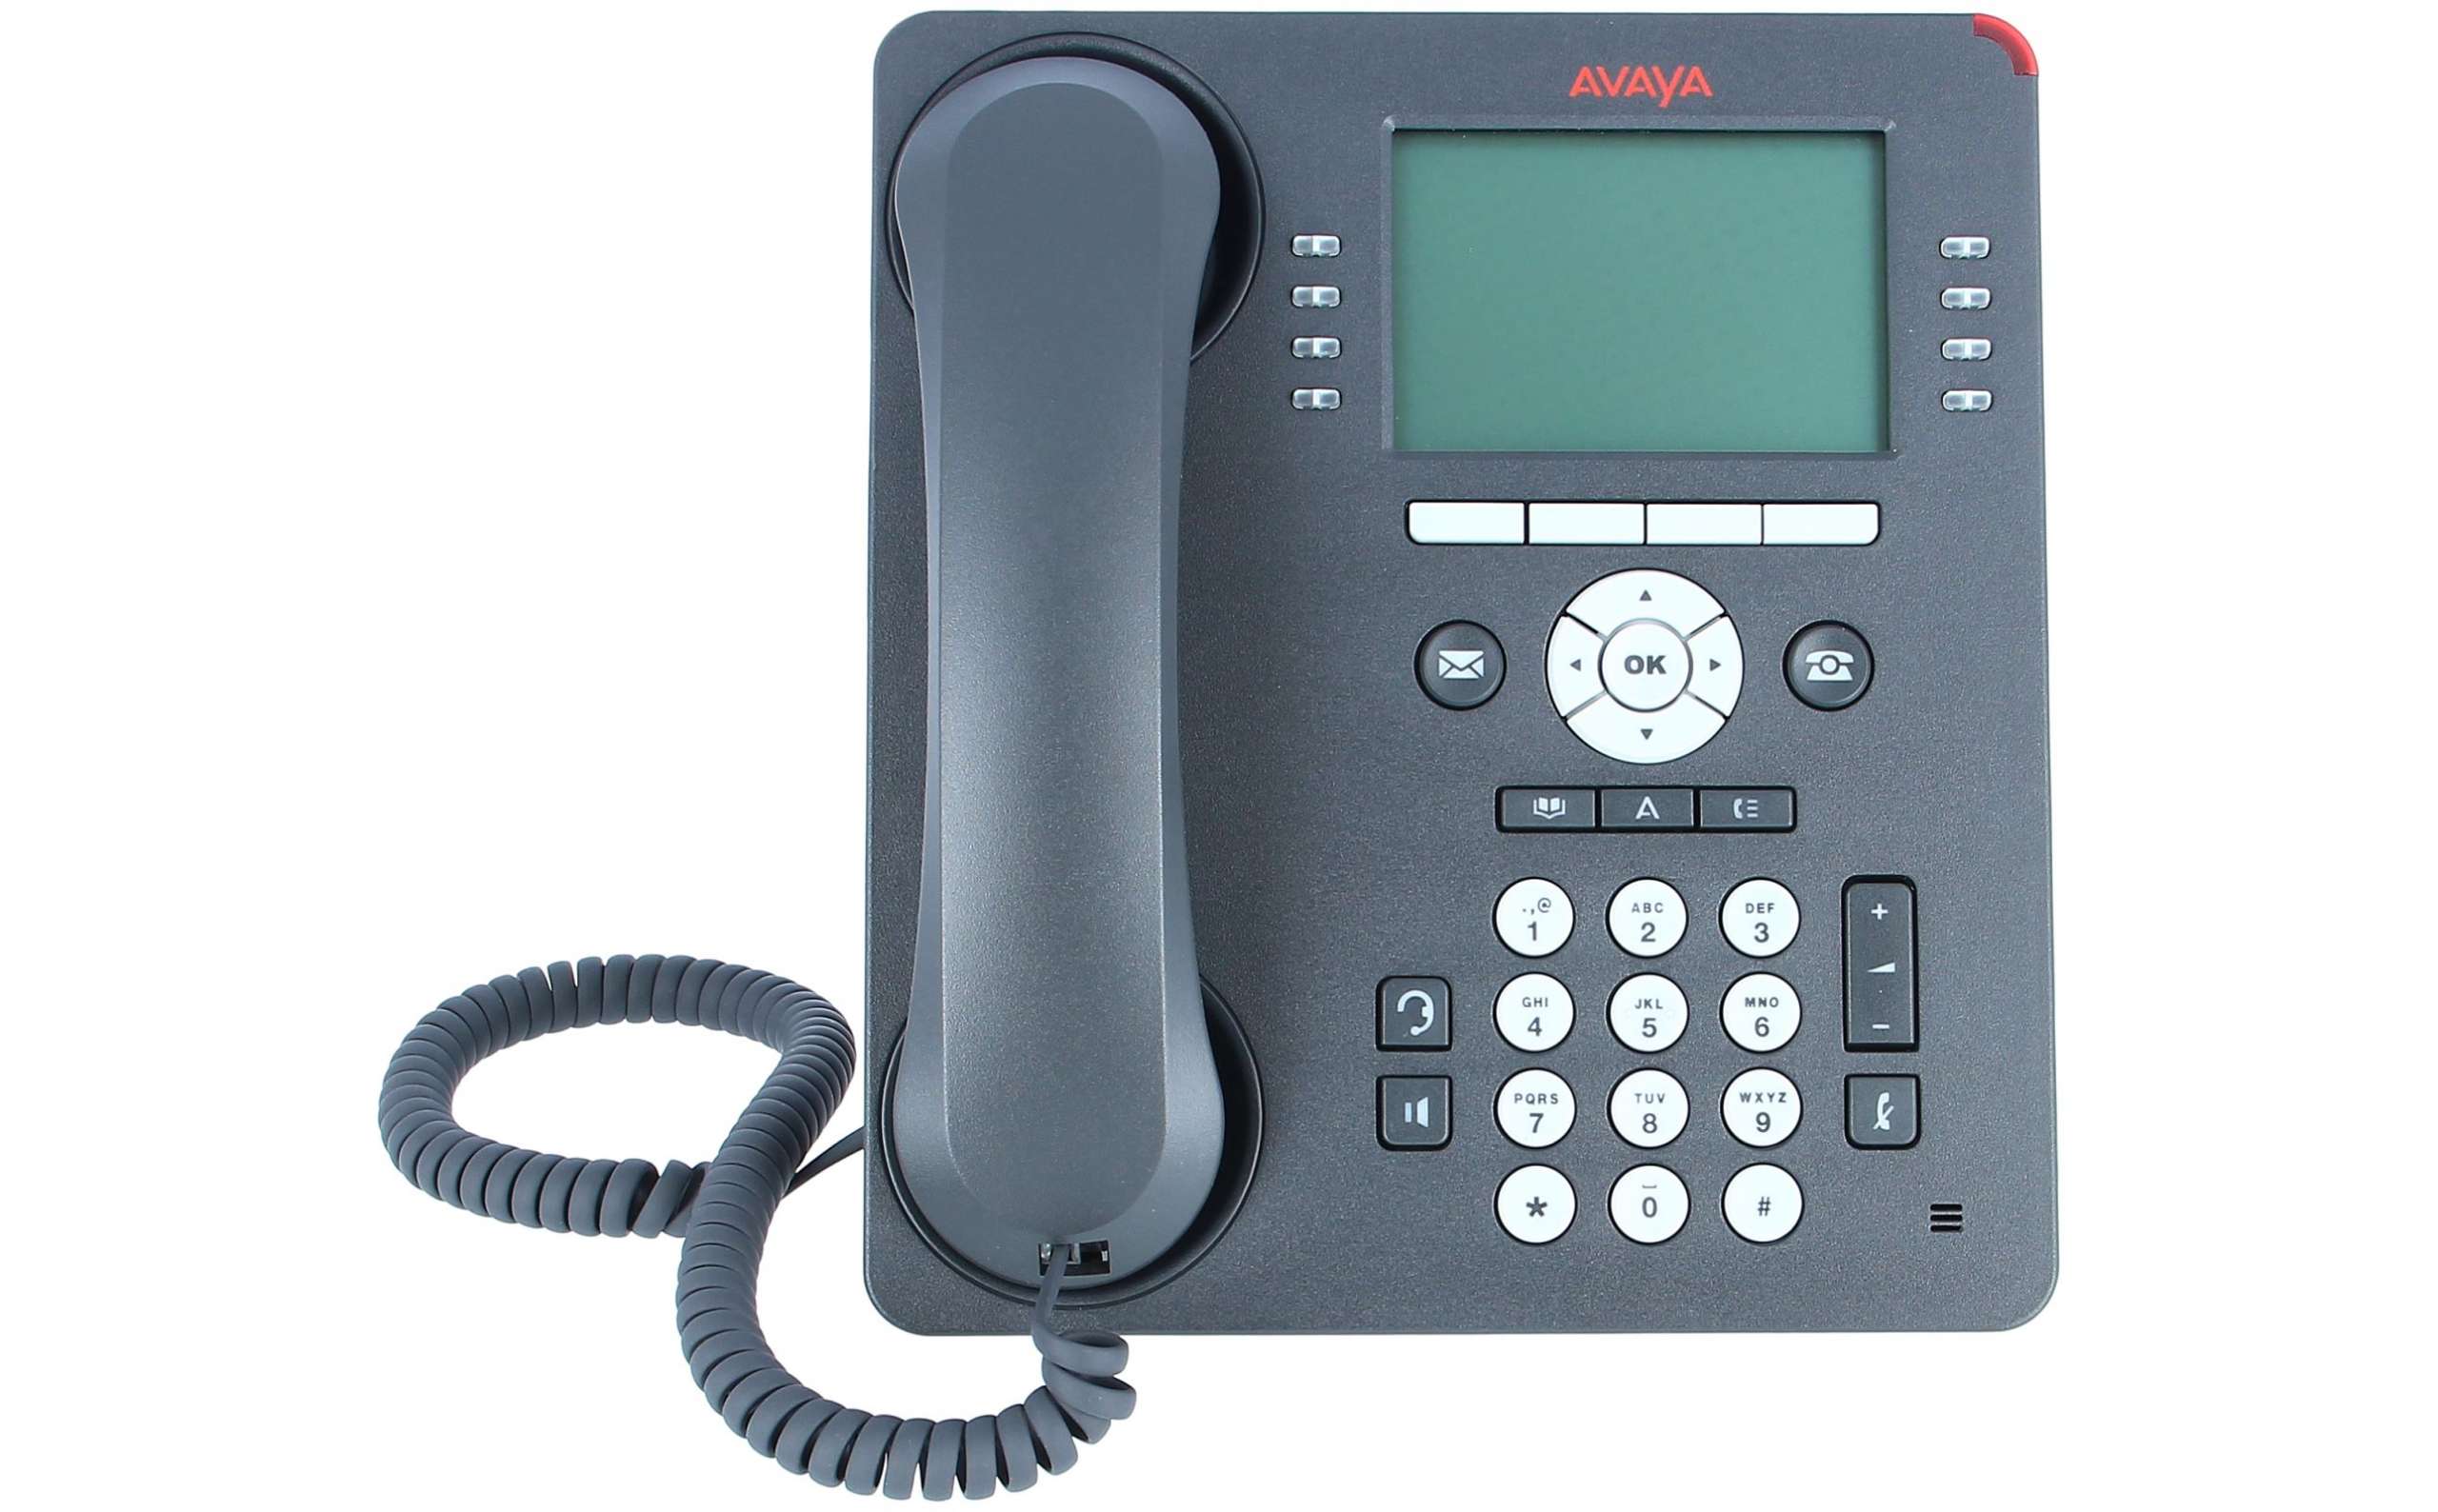 Avaya - 700505424 - IP and GRY prices 9608G PHONE buy new low online refurbished